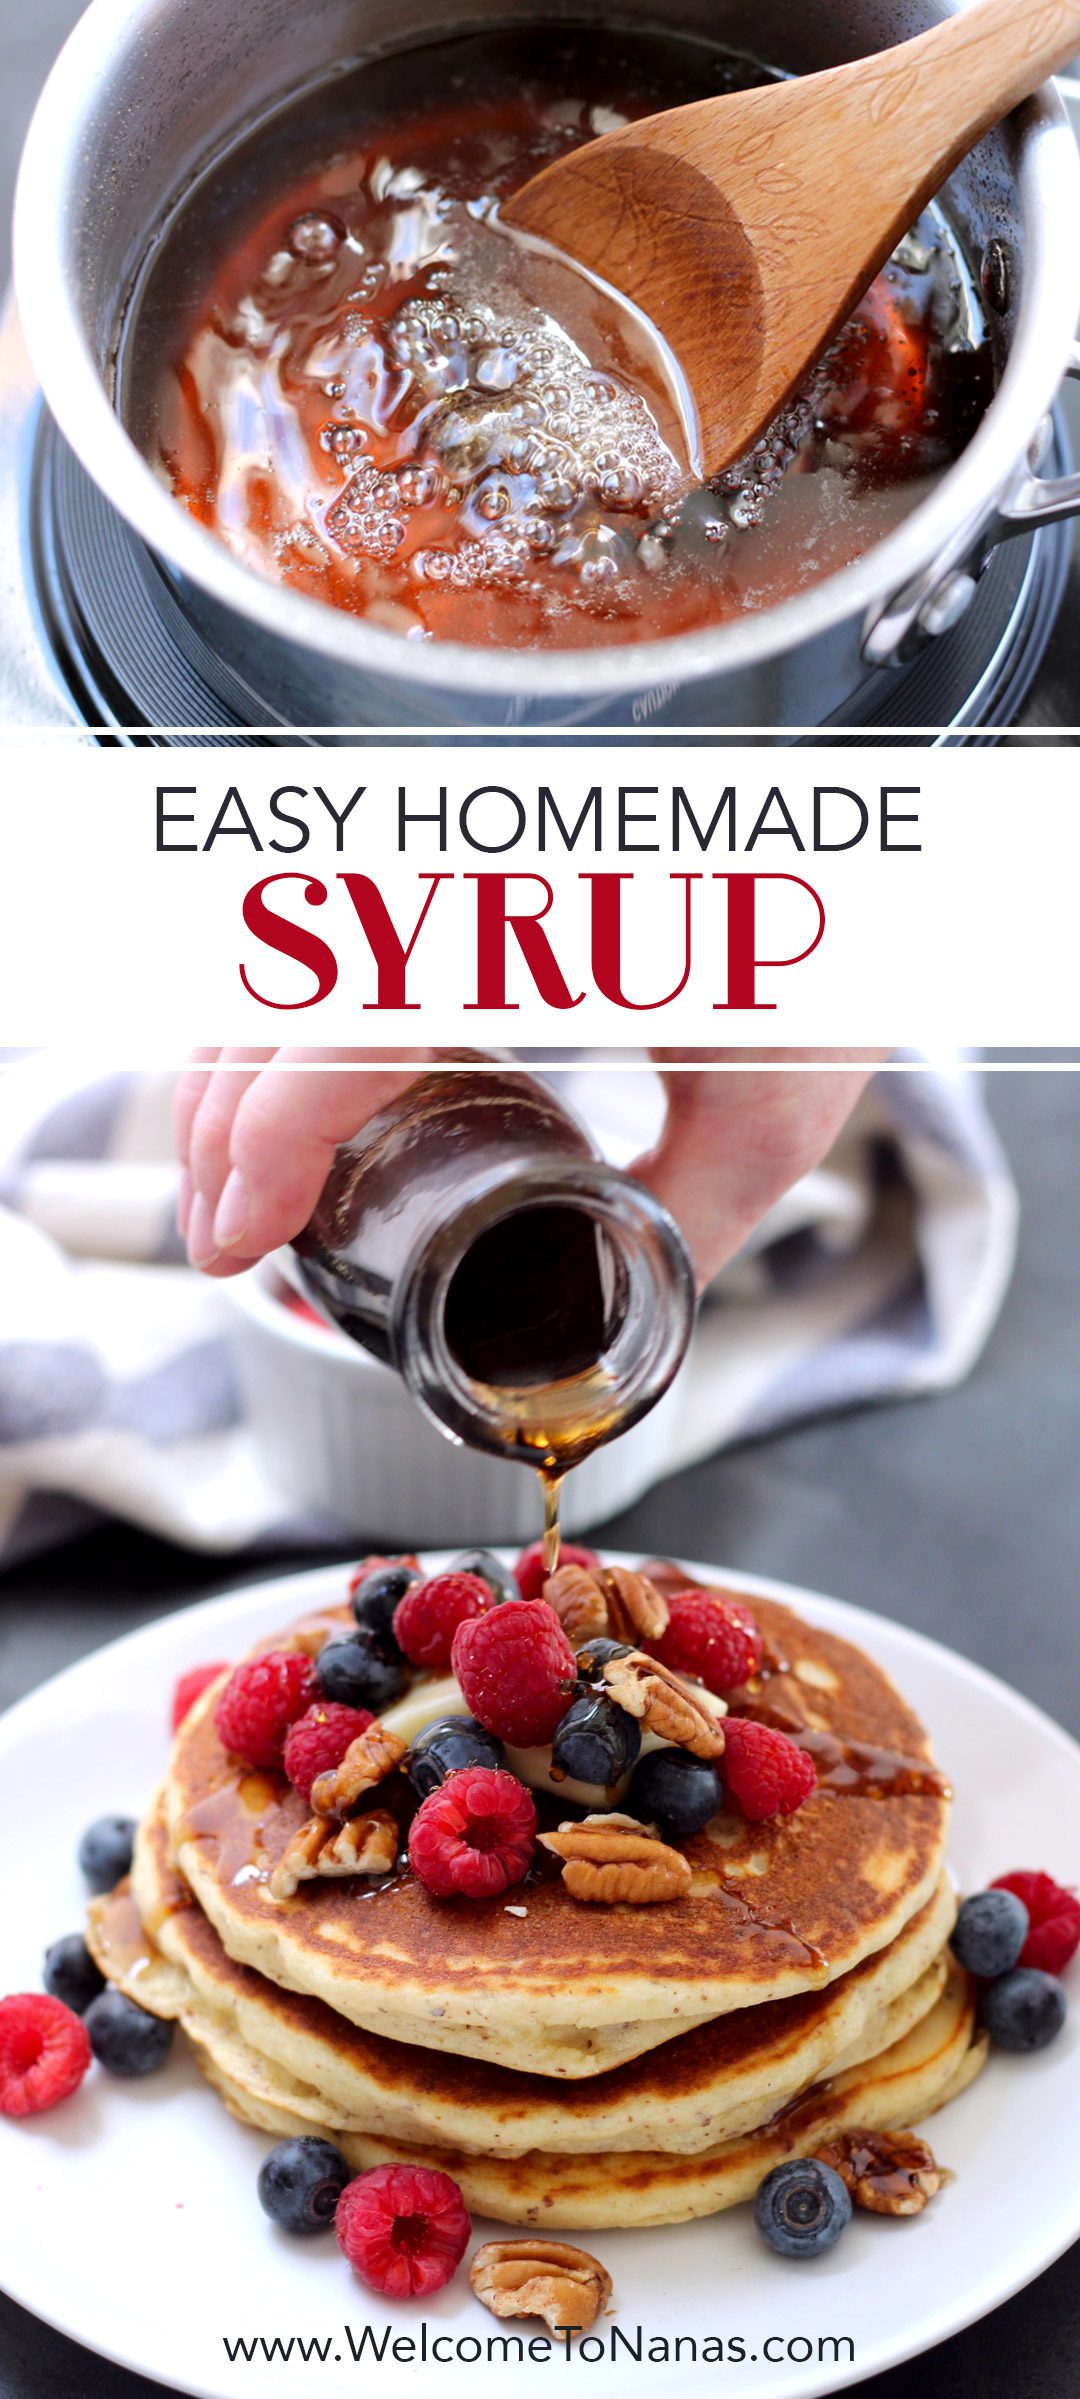 Pinterest image of stirring and pouring homemade syrup over a stack of pancakes.